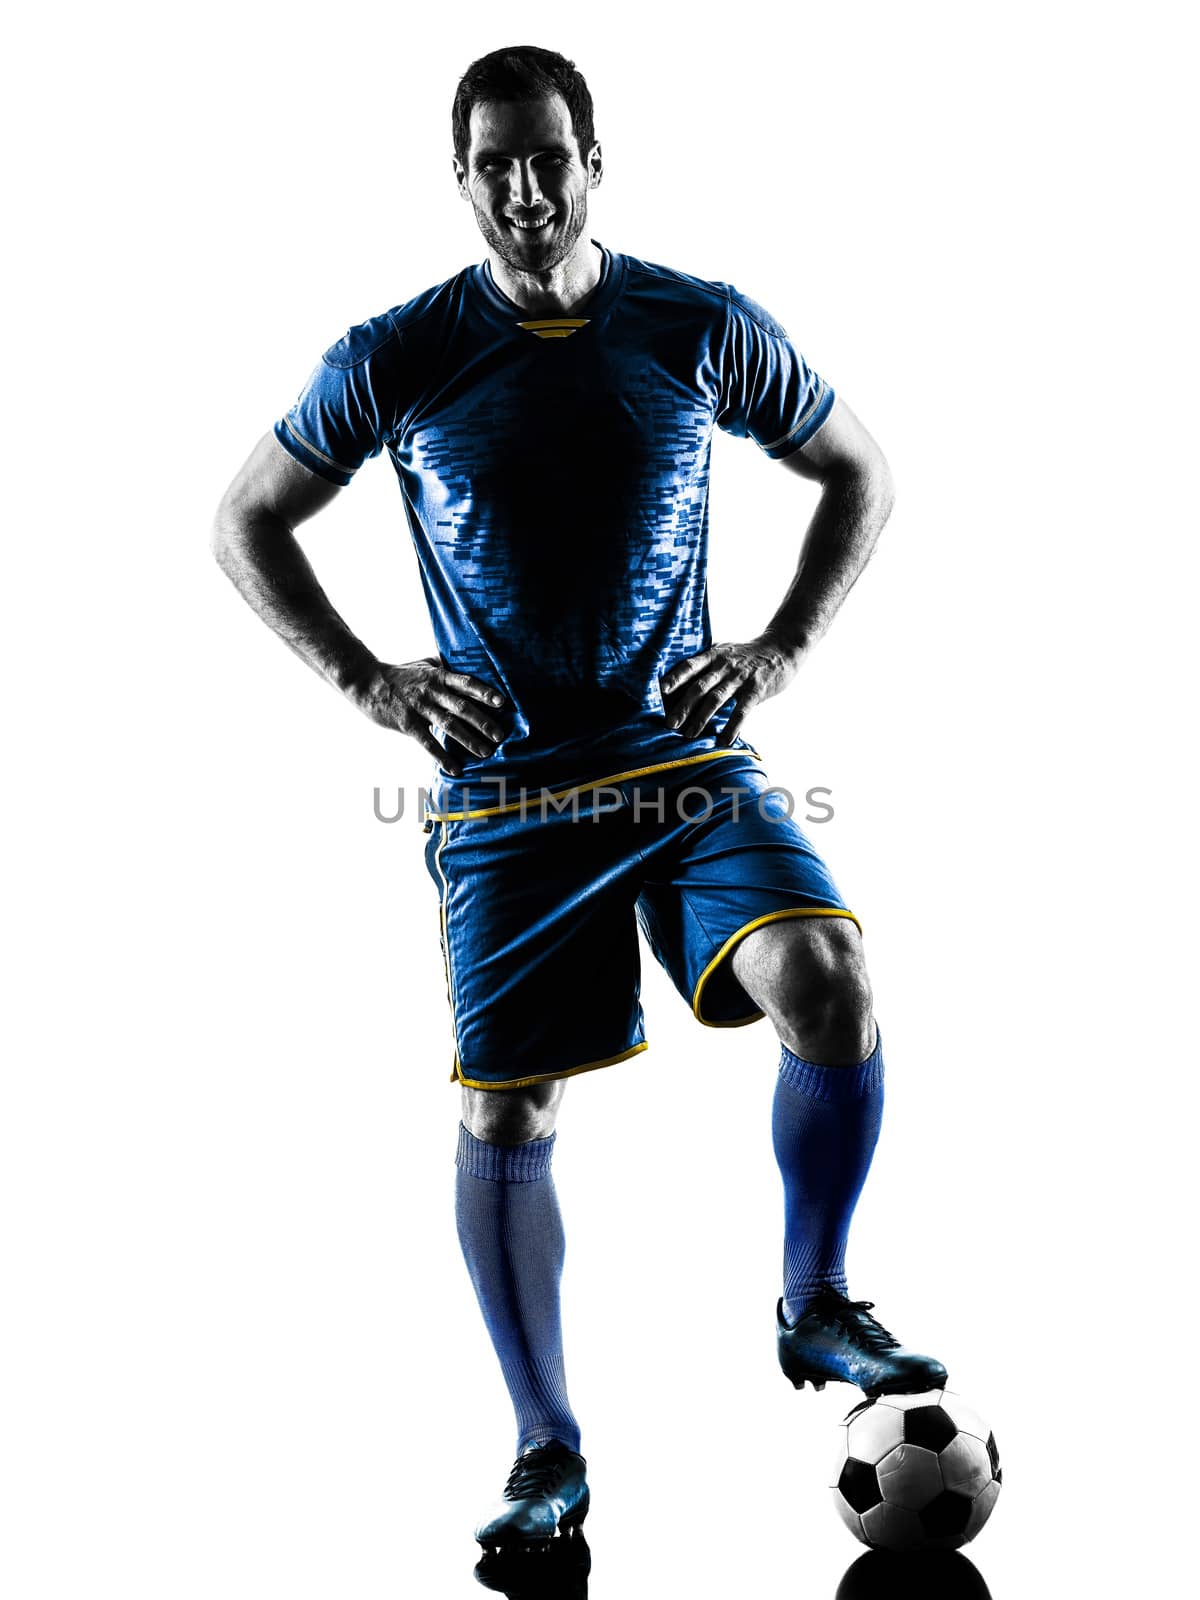 one caucasian soccer player man standing smiling in silhouette isolated on white background